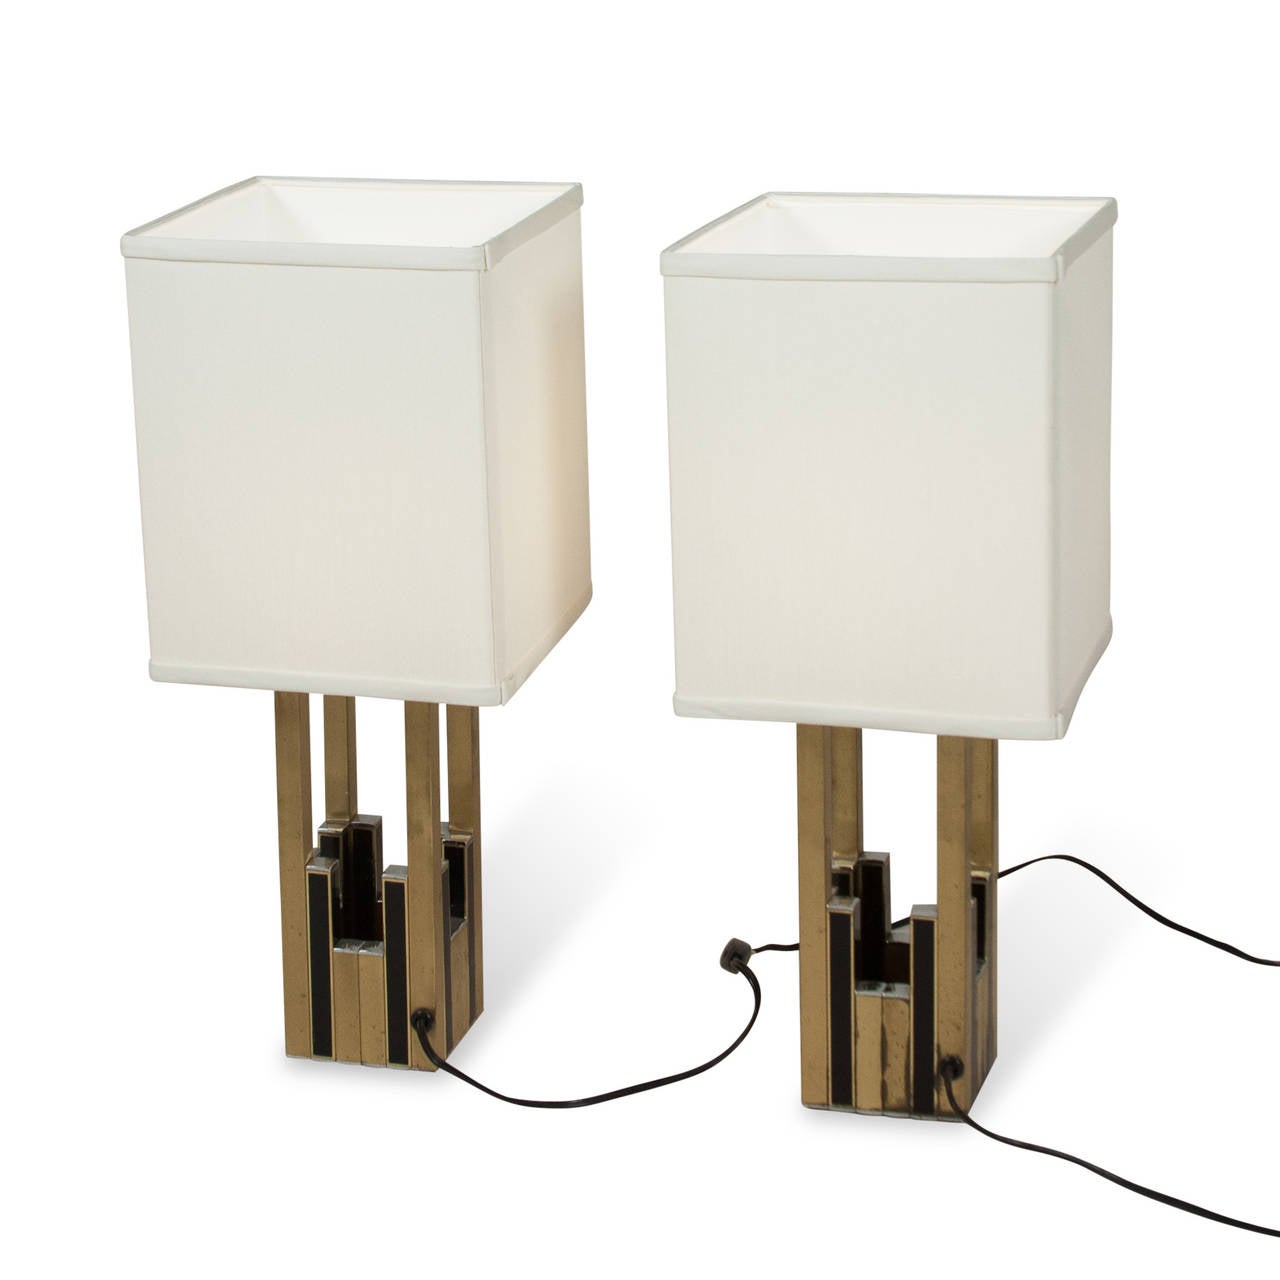 Brass and black lacquered brass table lamps, open rectangular column form with alternating black and brass elements by Lumica, Spanish, 1970s. Overall height 20 1/2 in, height of base to top of metal 10 in, base measures 3 3/4 in square. Shade